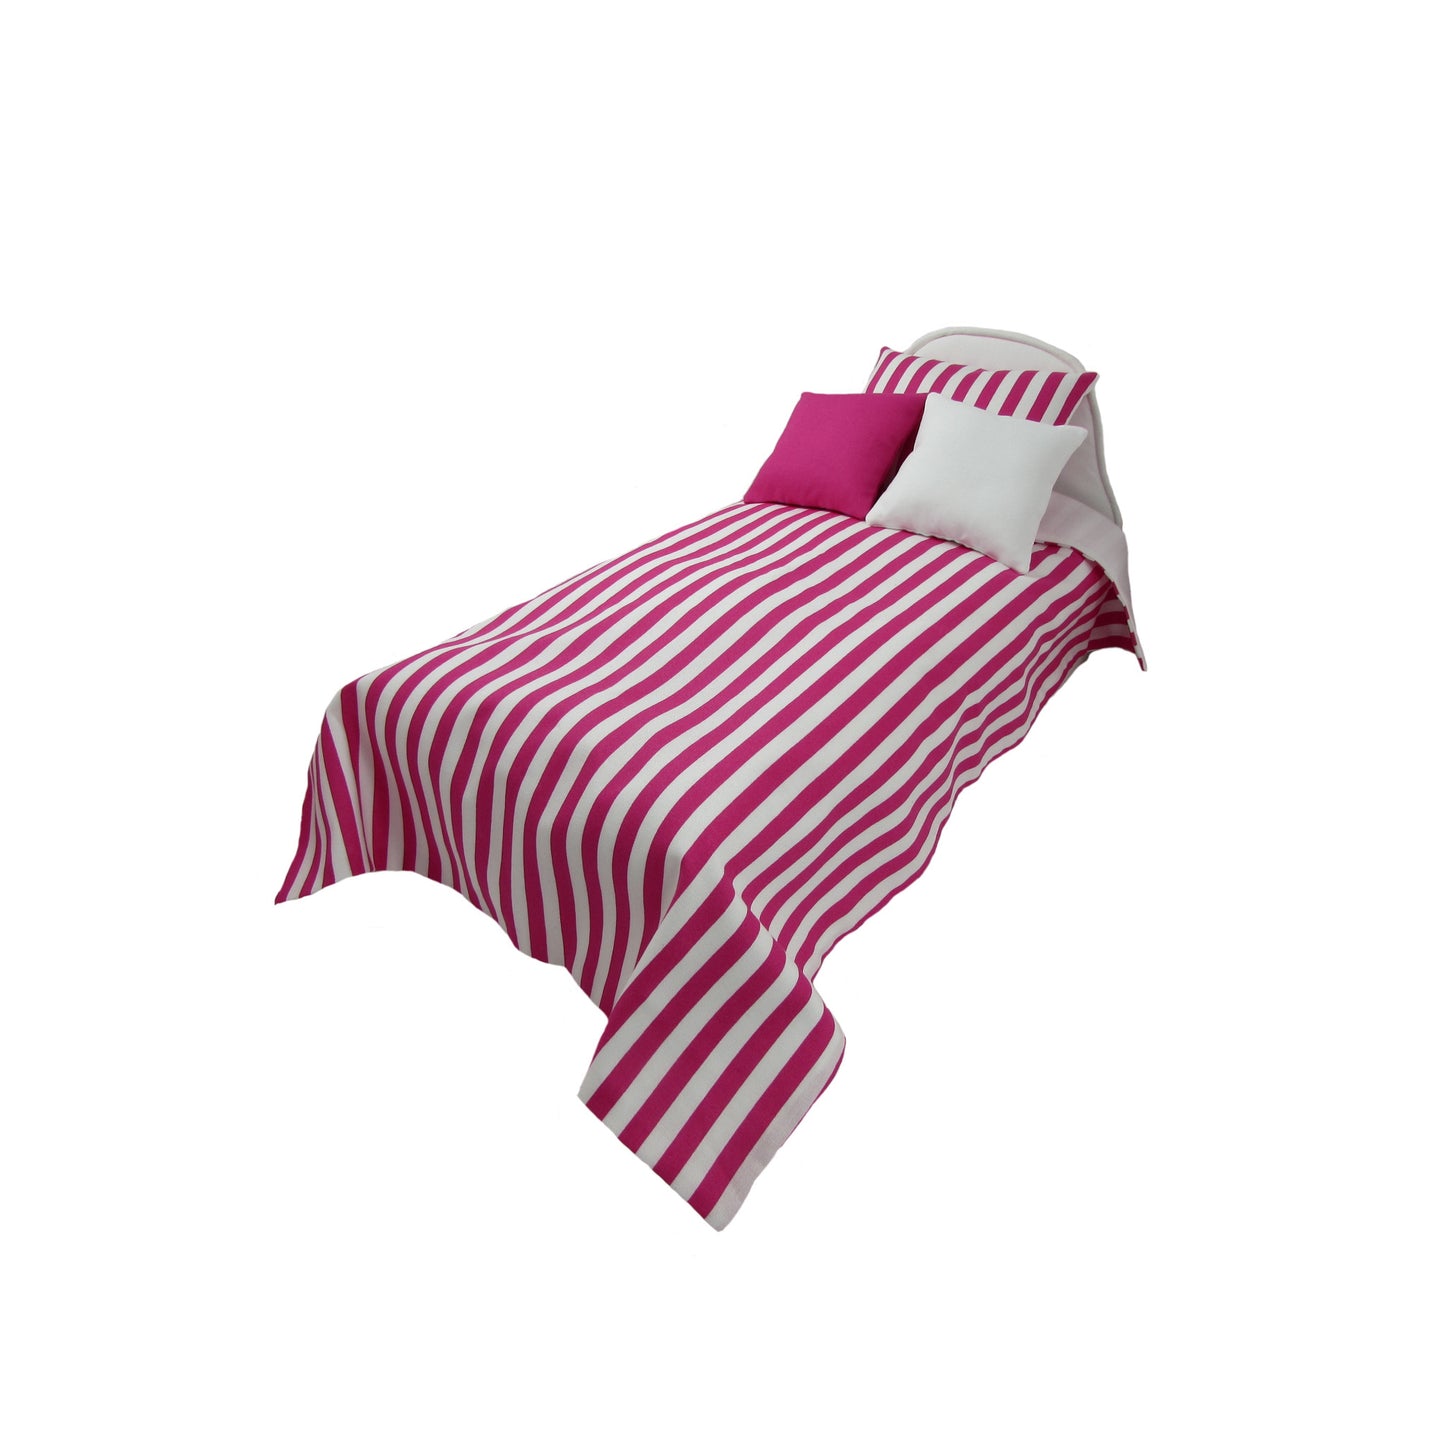 Upholstered White Doll Bed and Pink White Stripes Doll Bedding for 14.5-inch dolls Third view